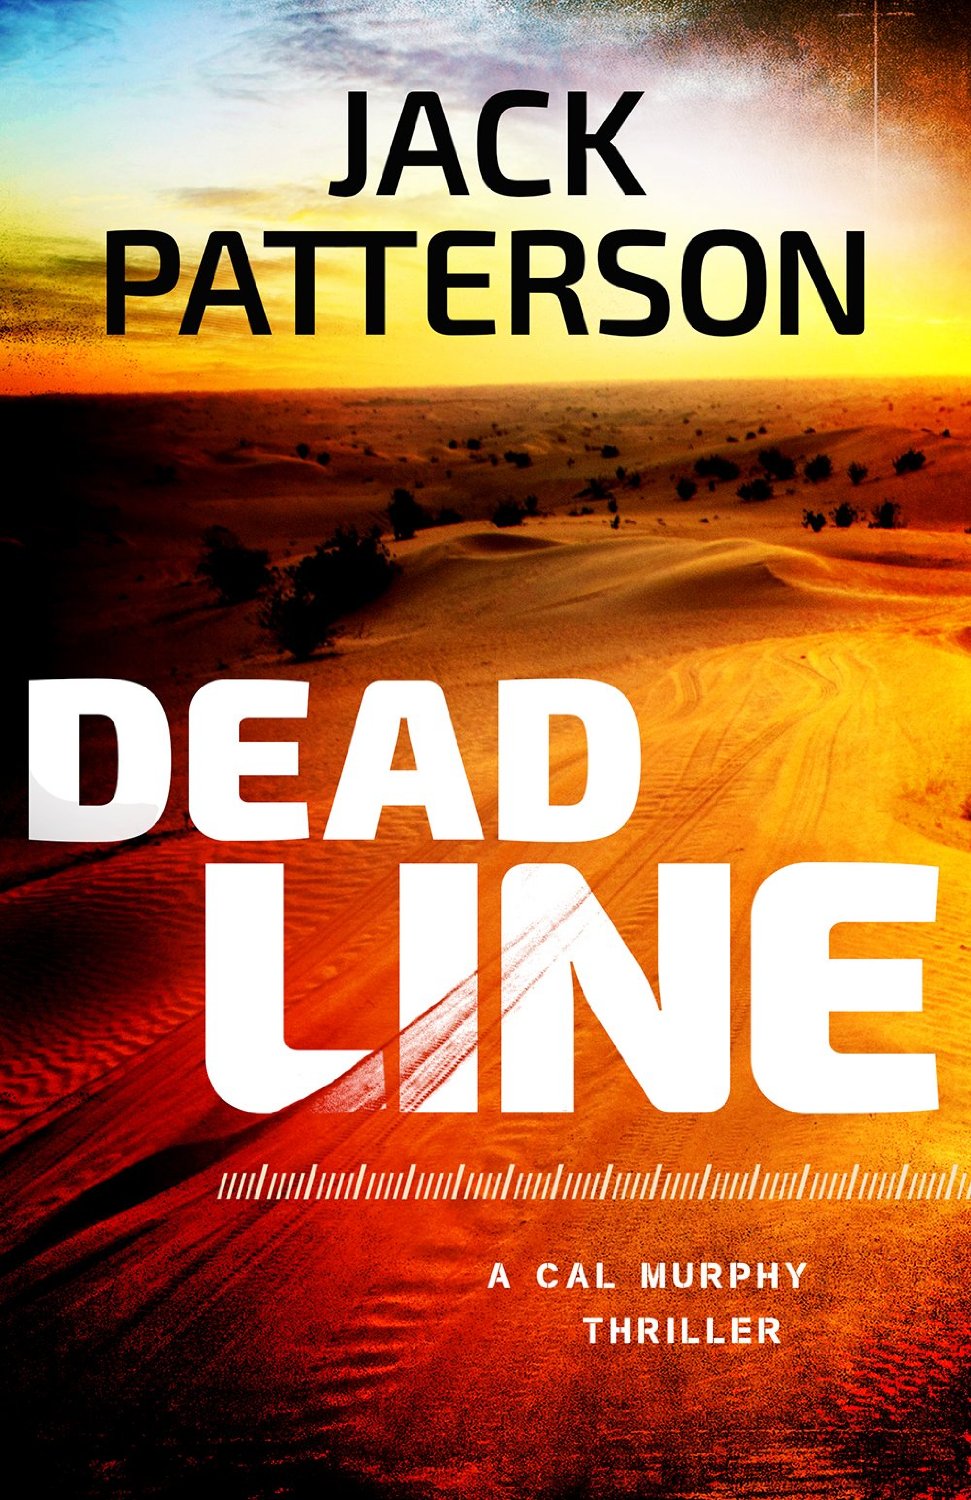 Dead Line (A Cal Murphy Thriller Book 2) by Jack Patterson